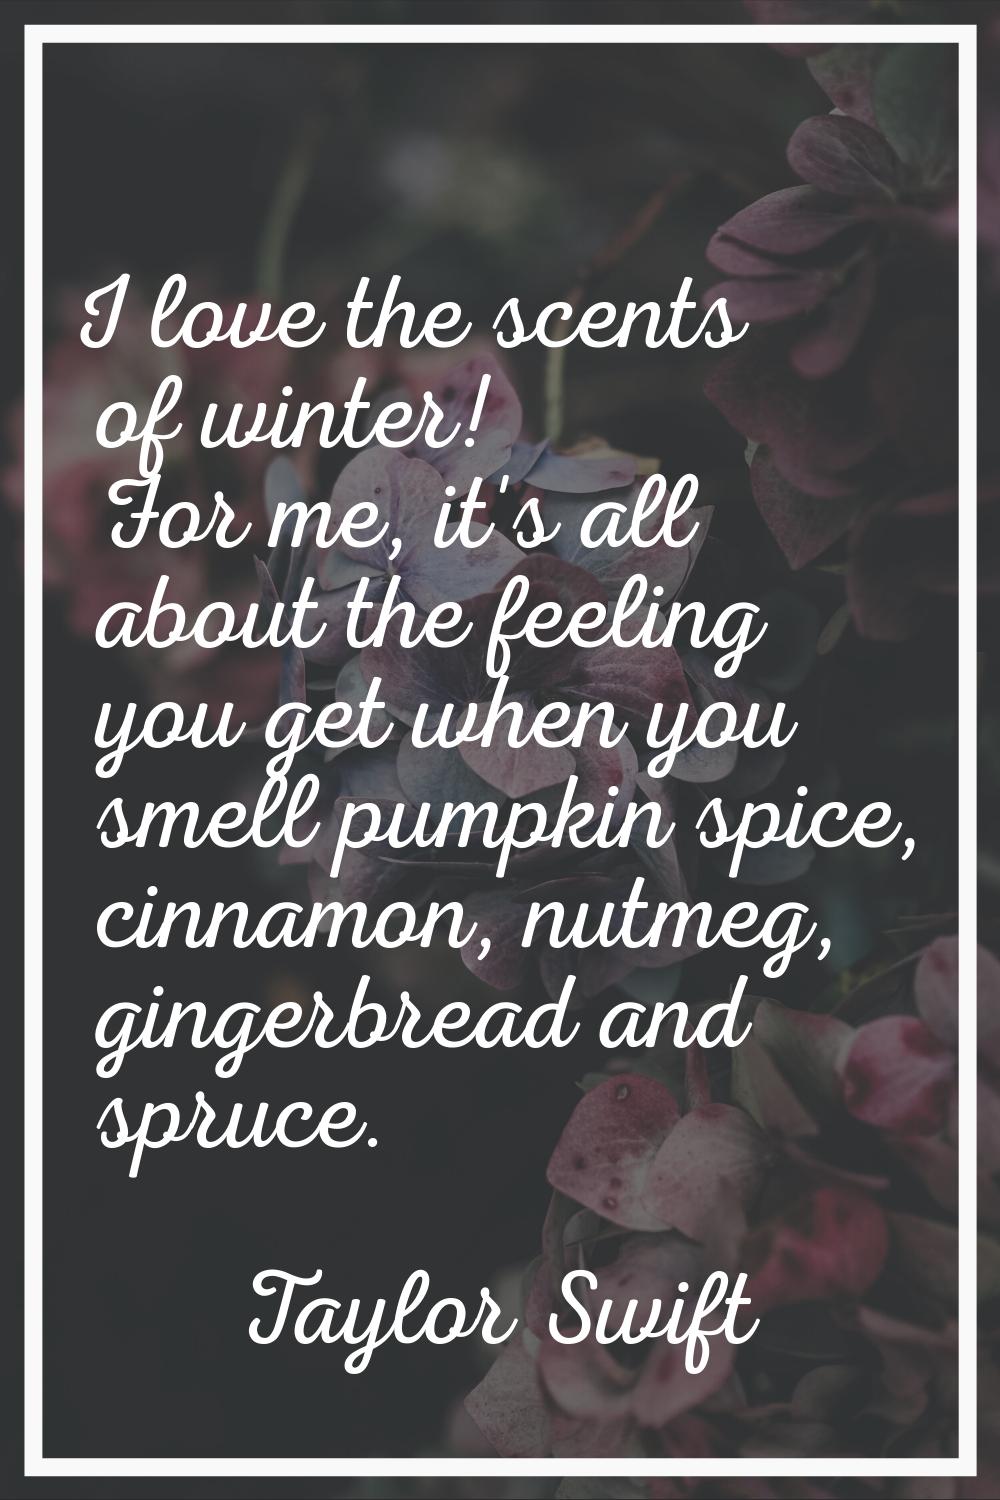 I love the scents of winter! For me, it's all about the feeling you get when you smell pumpkin spic